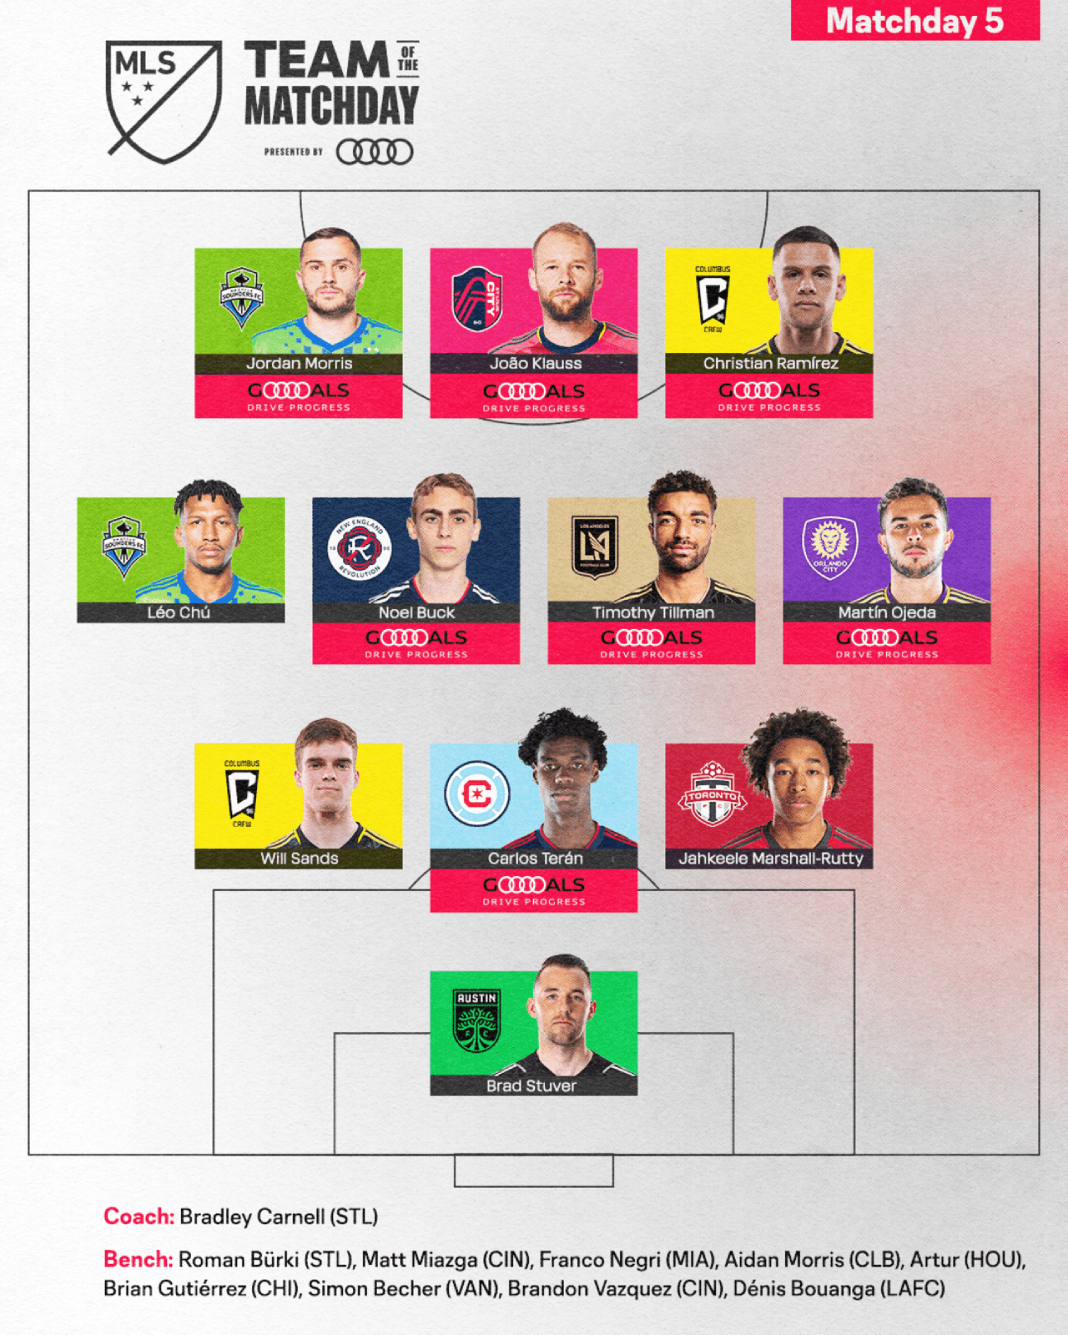 Team of the Matchday 5